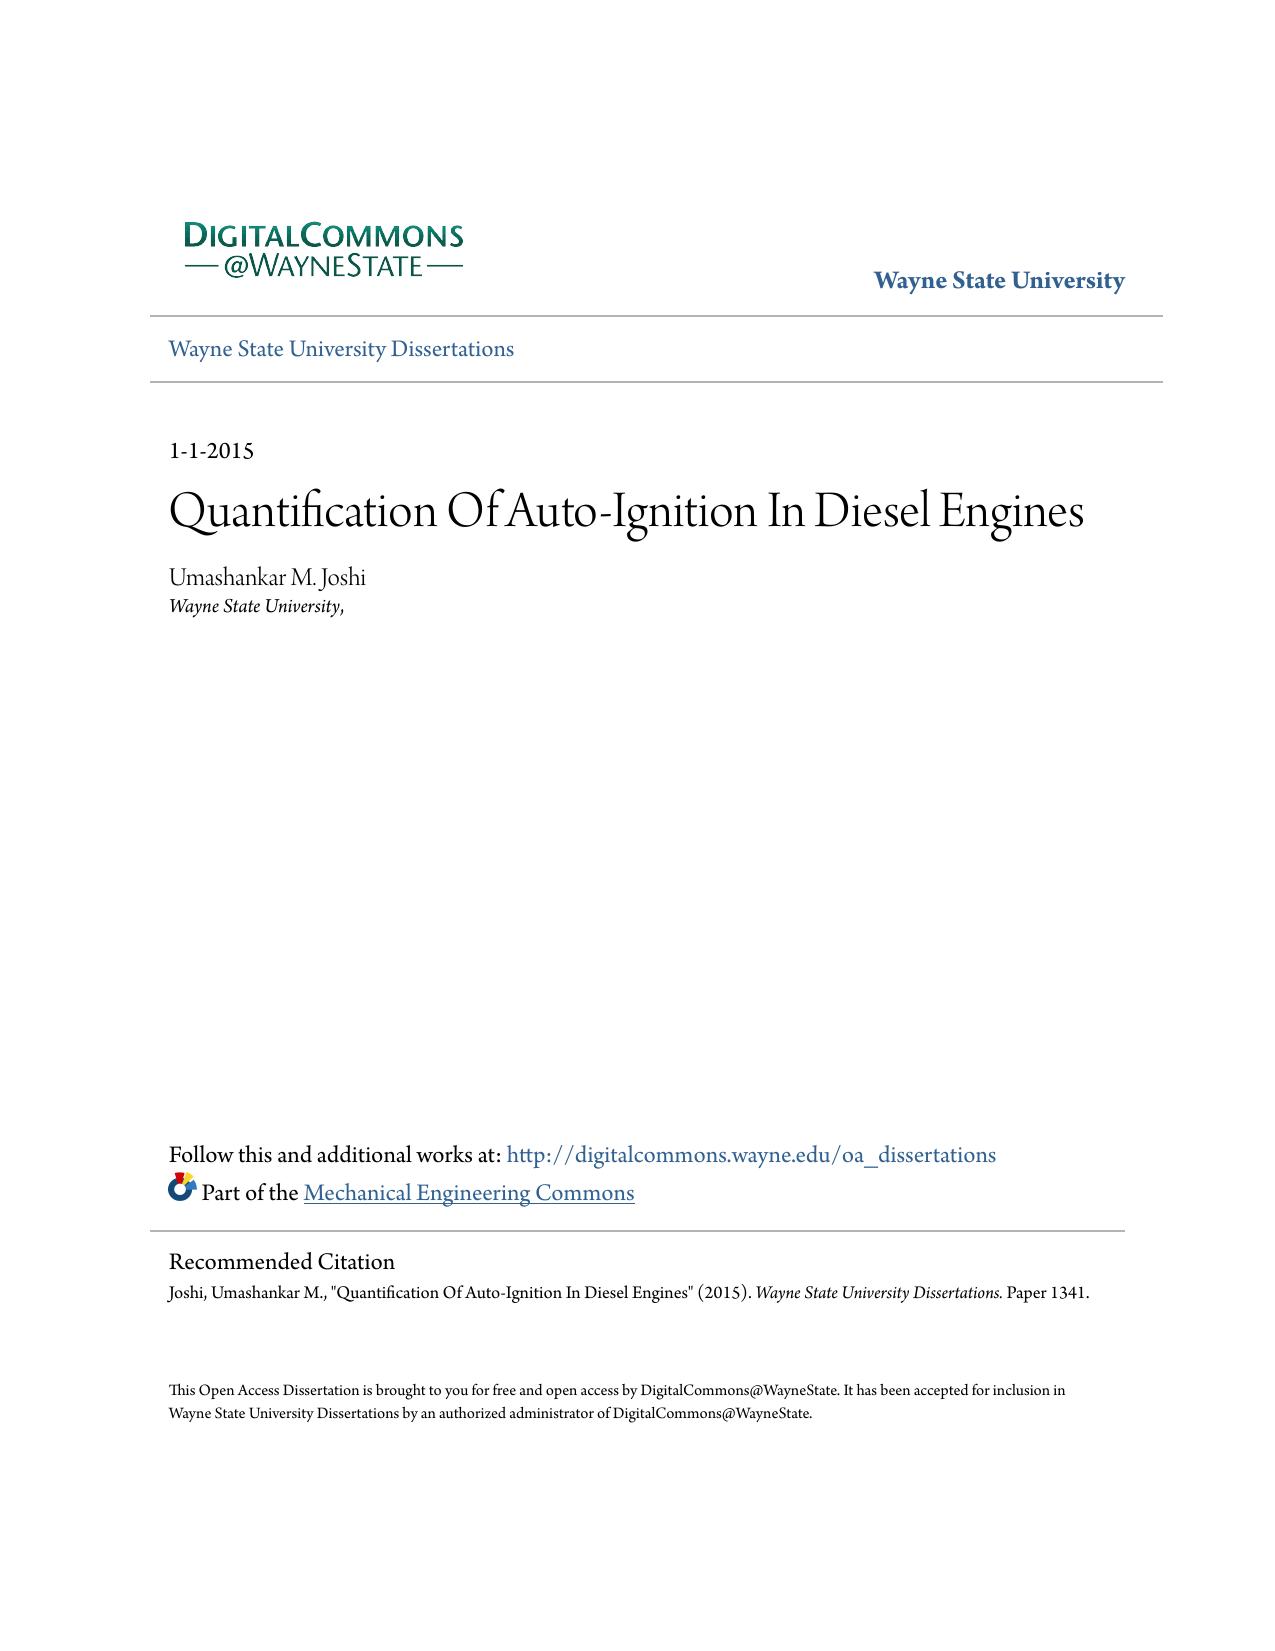 Quantification Of Auto-Ignition In Diesel Engines